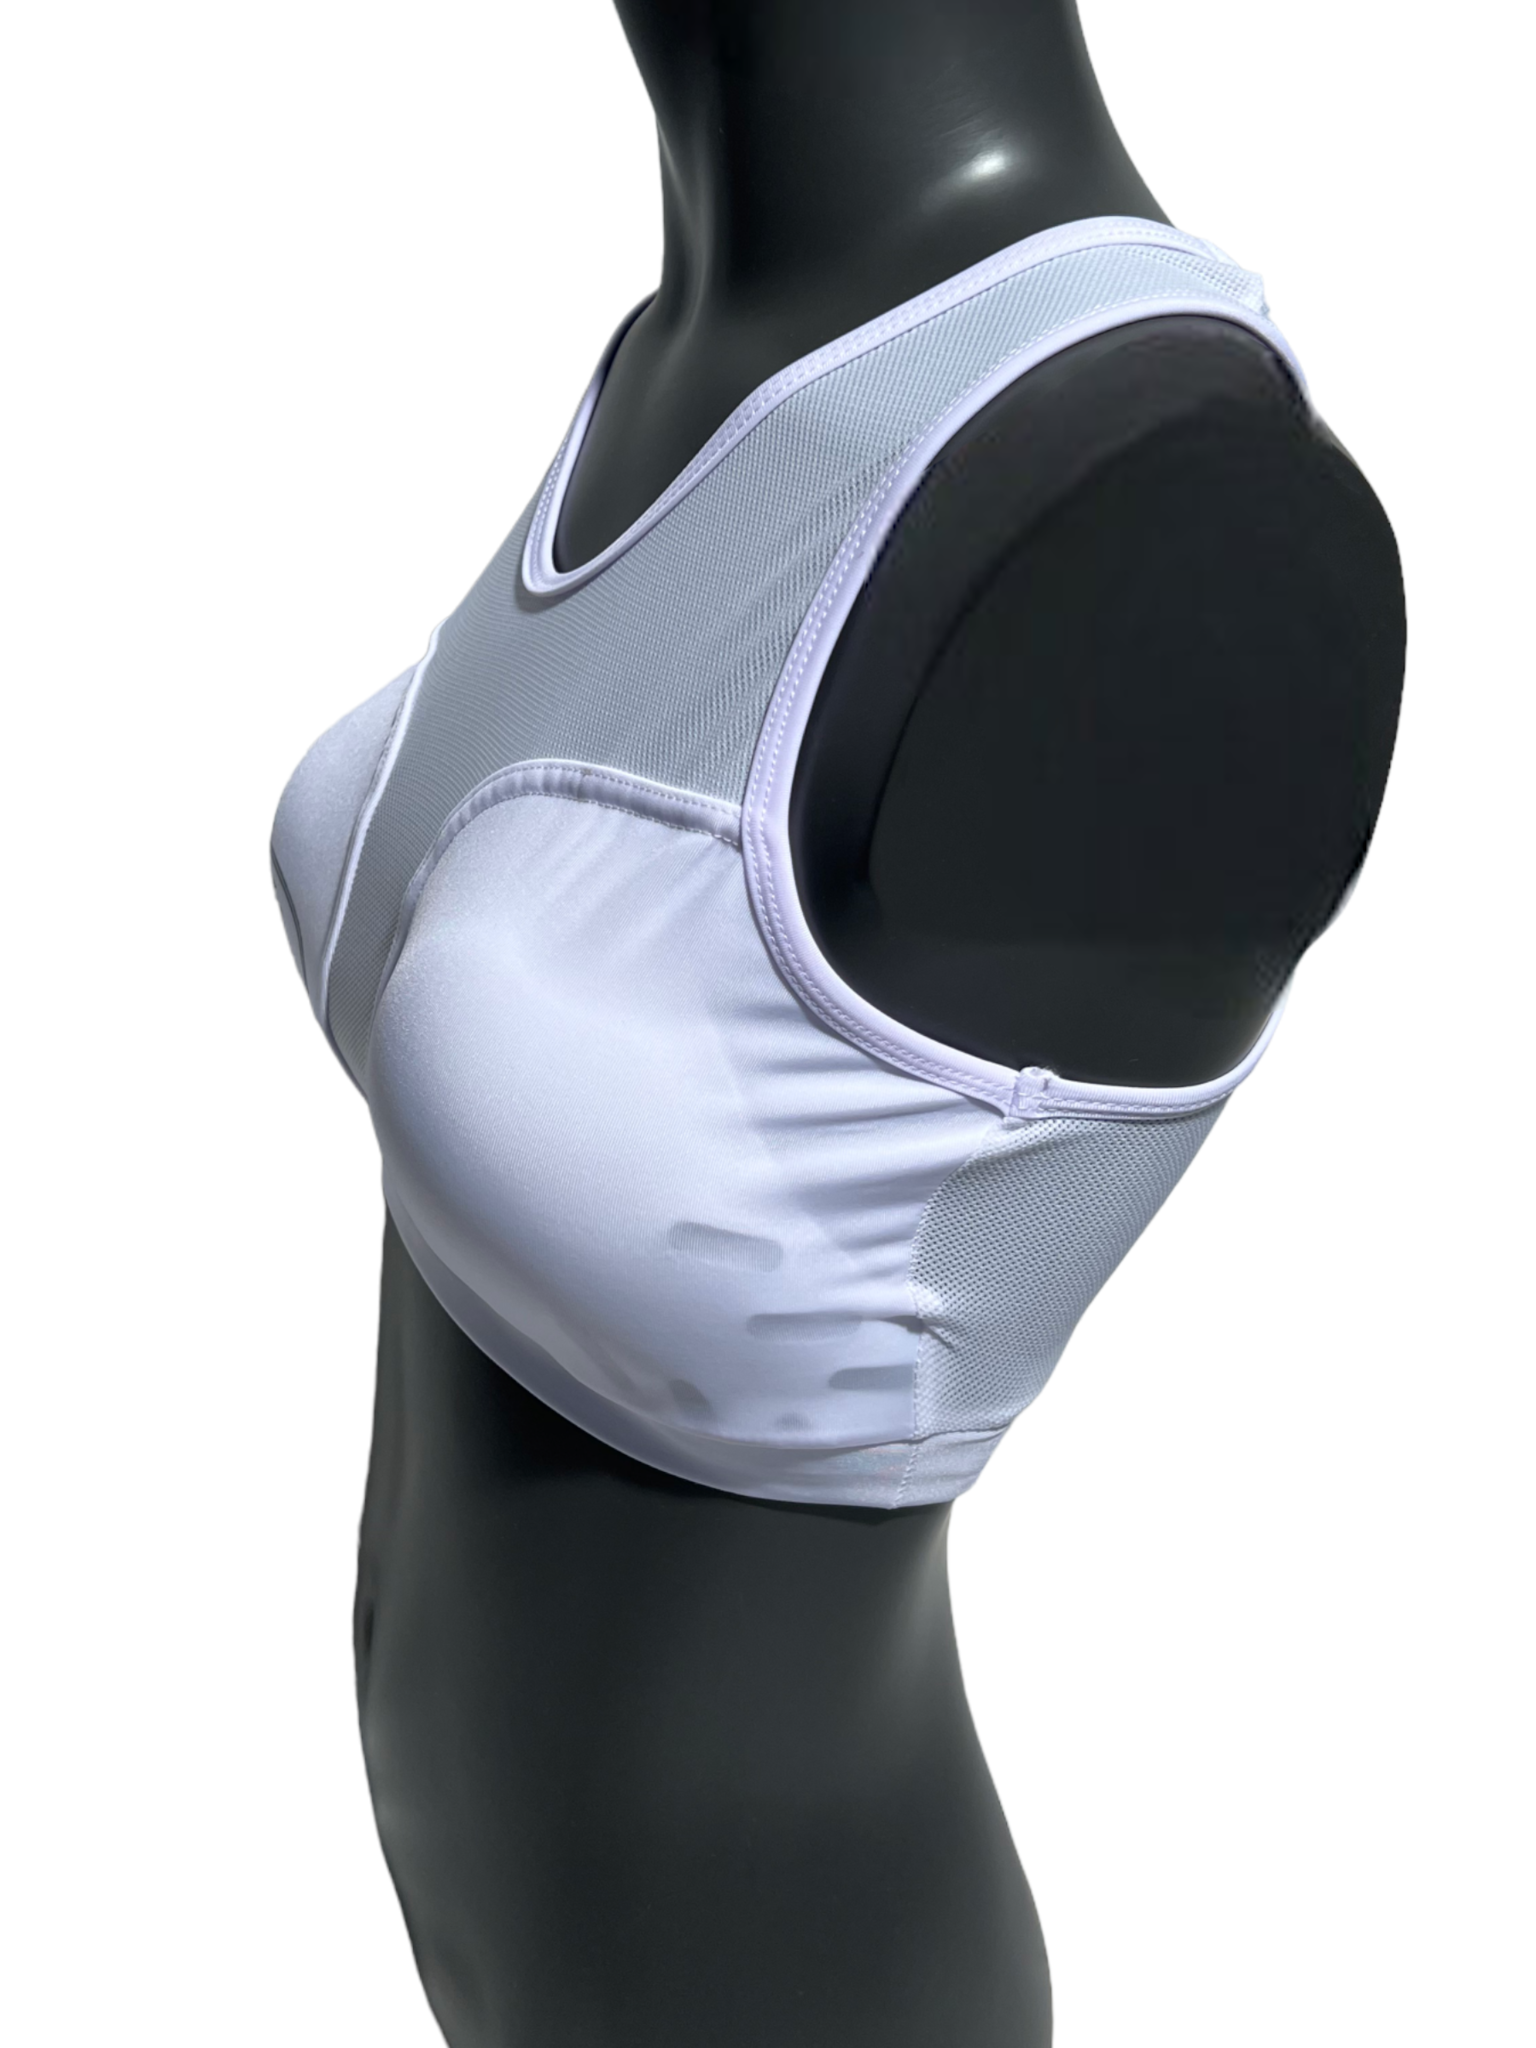 ISAMU Essentials - Top with protective cups for women